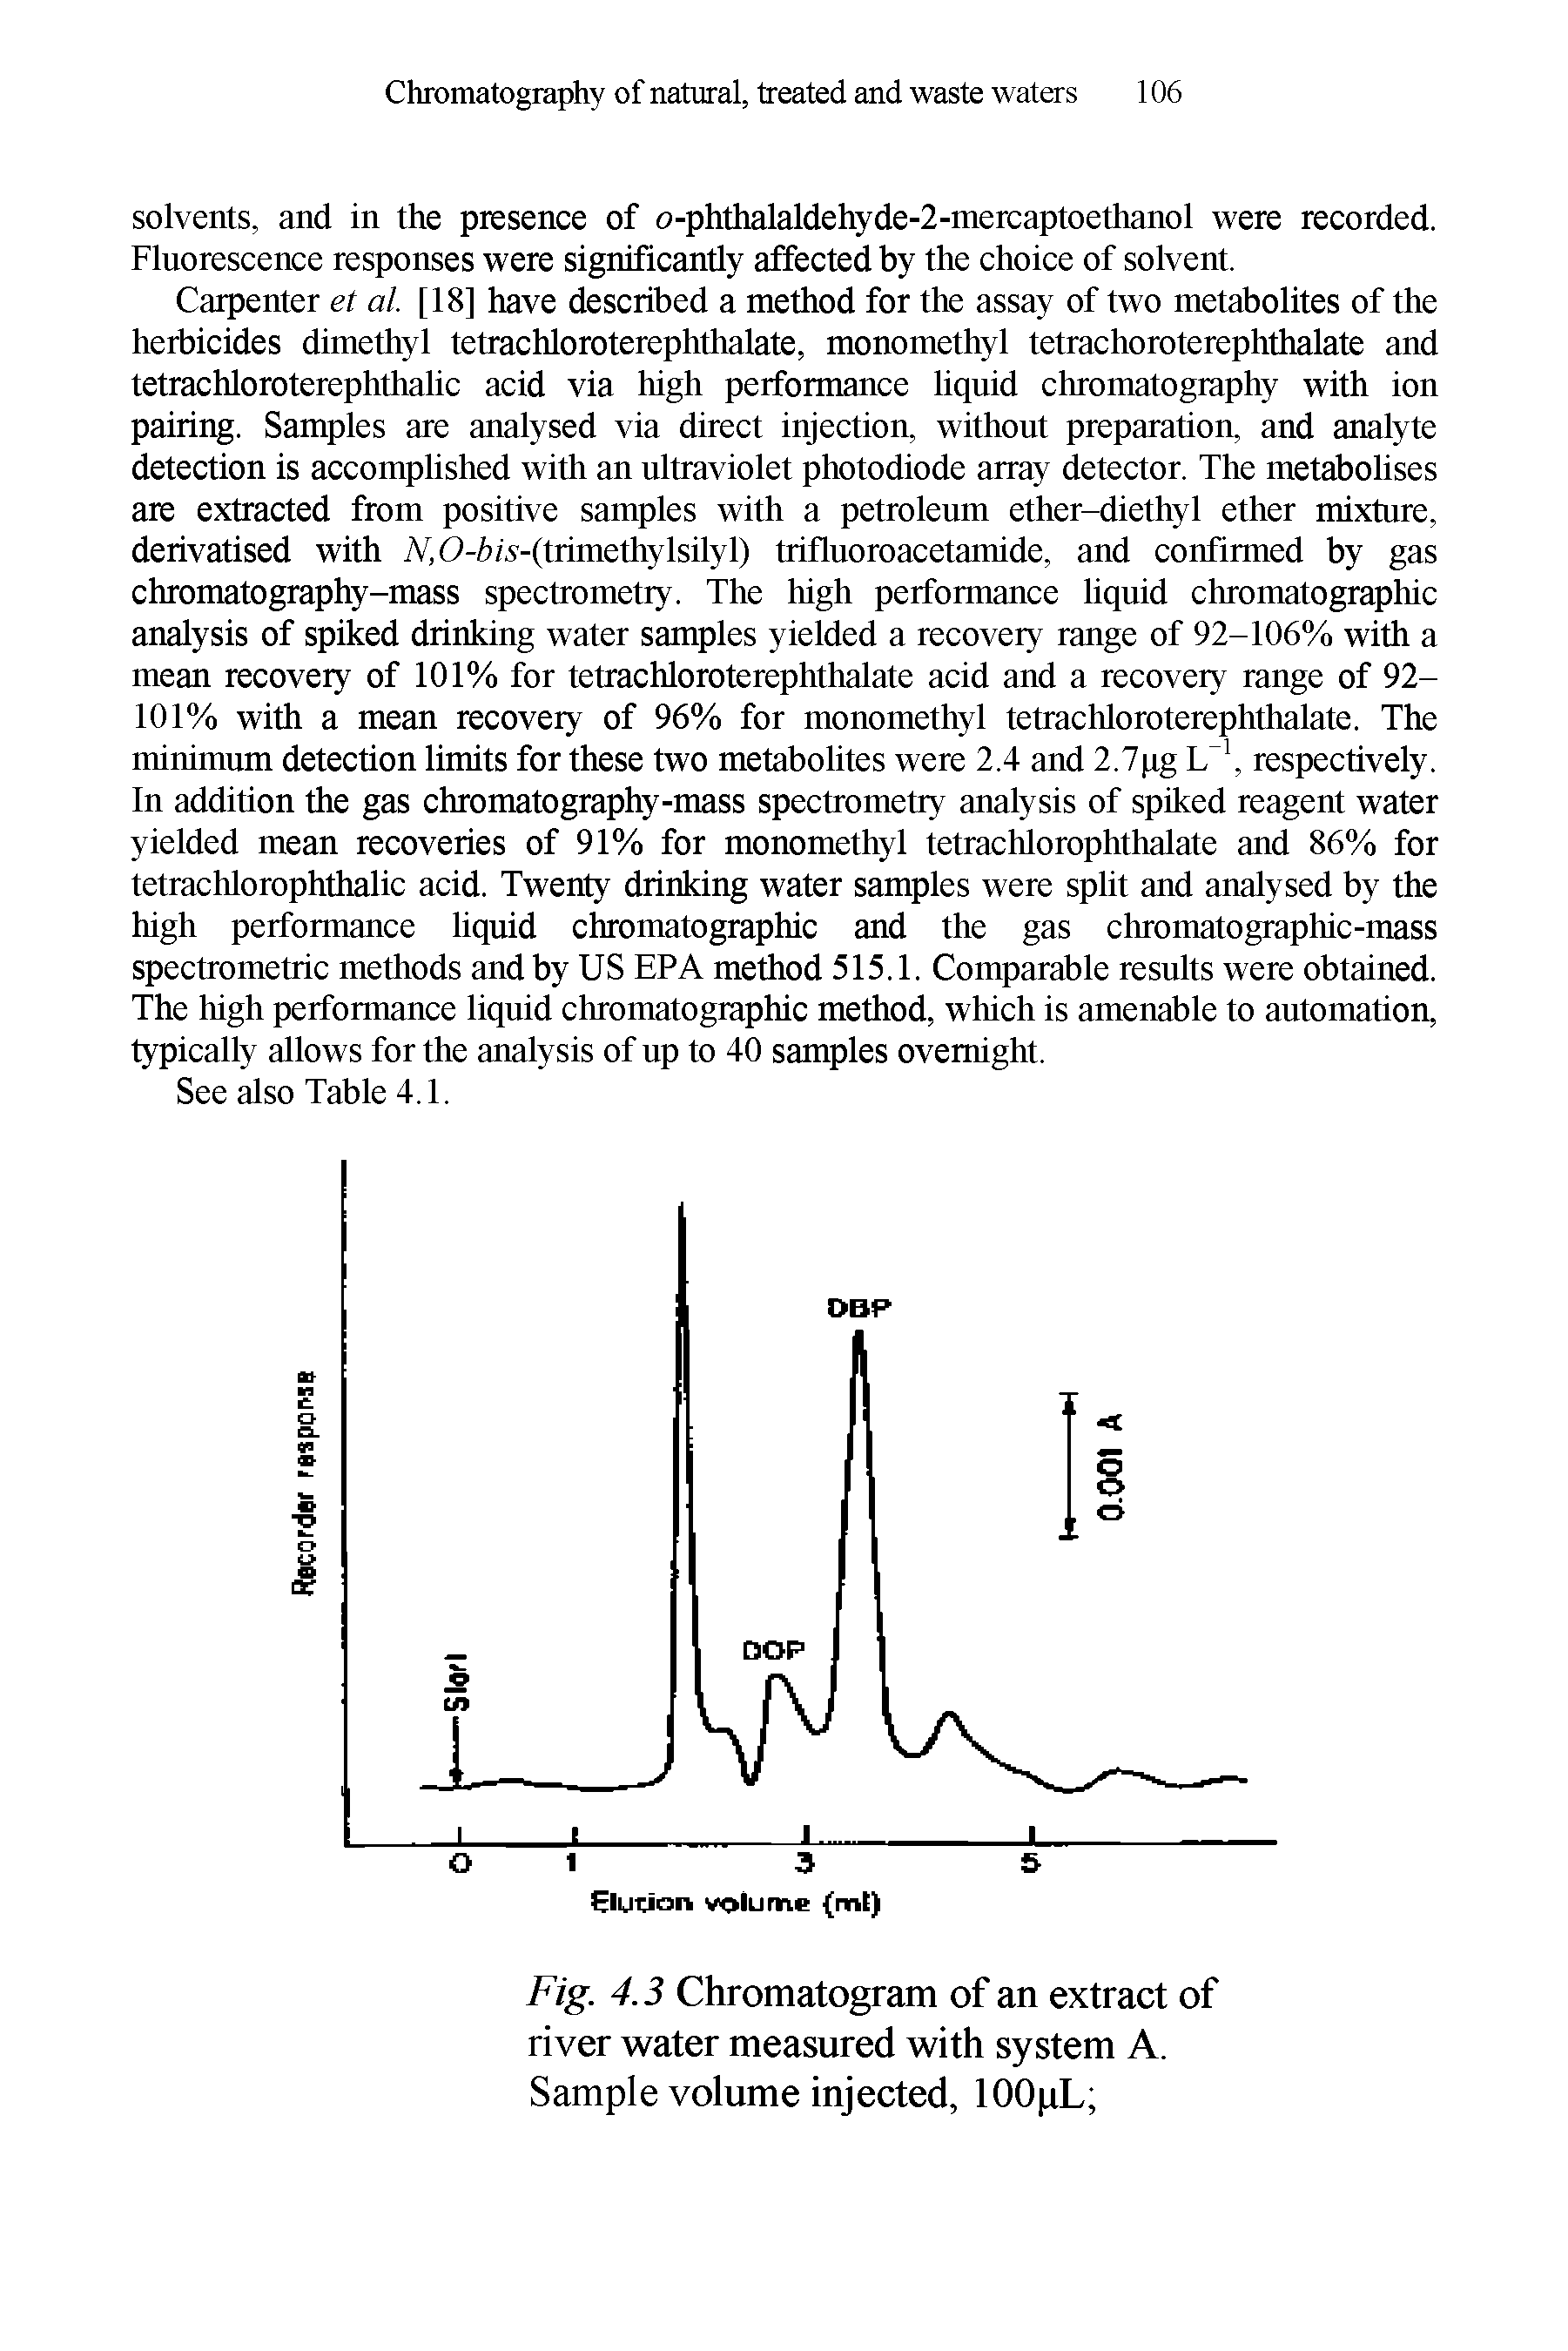 Fig. 4.3 Chromatogram of an extract of river water measured with system A. Sample volume injected, lOOpL ...